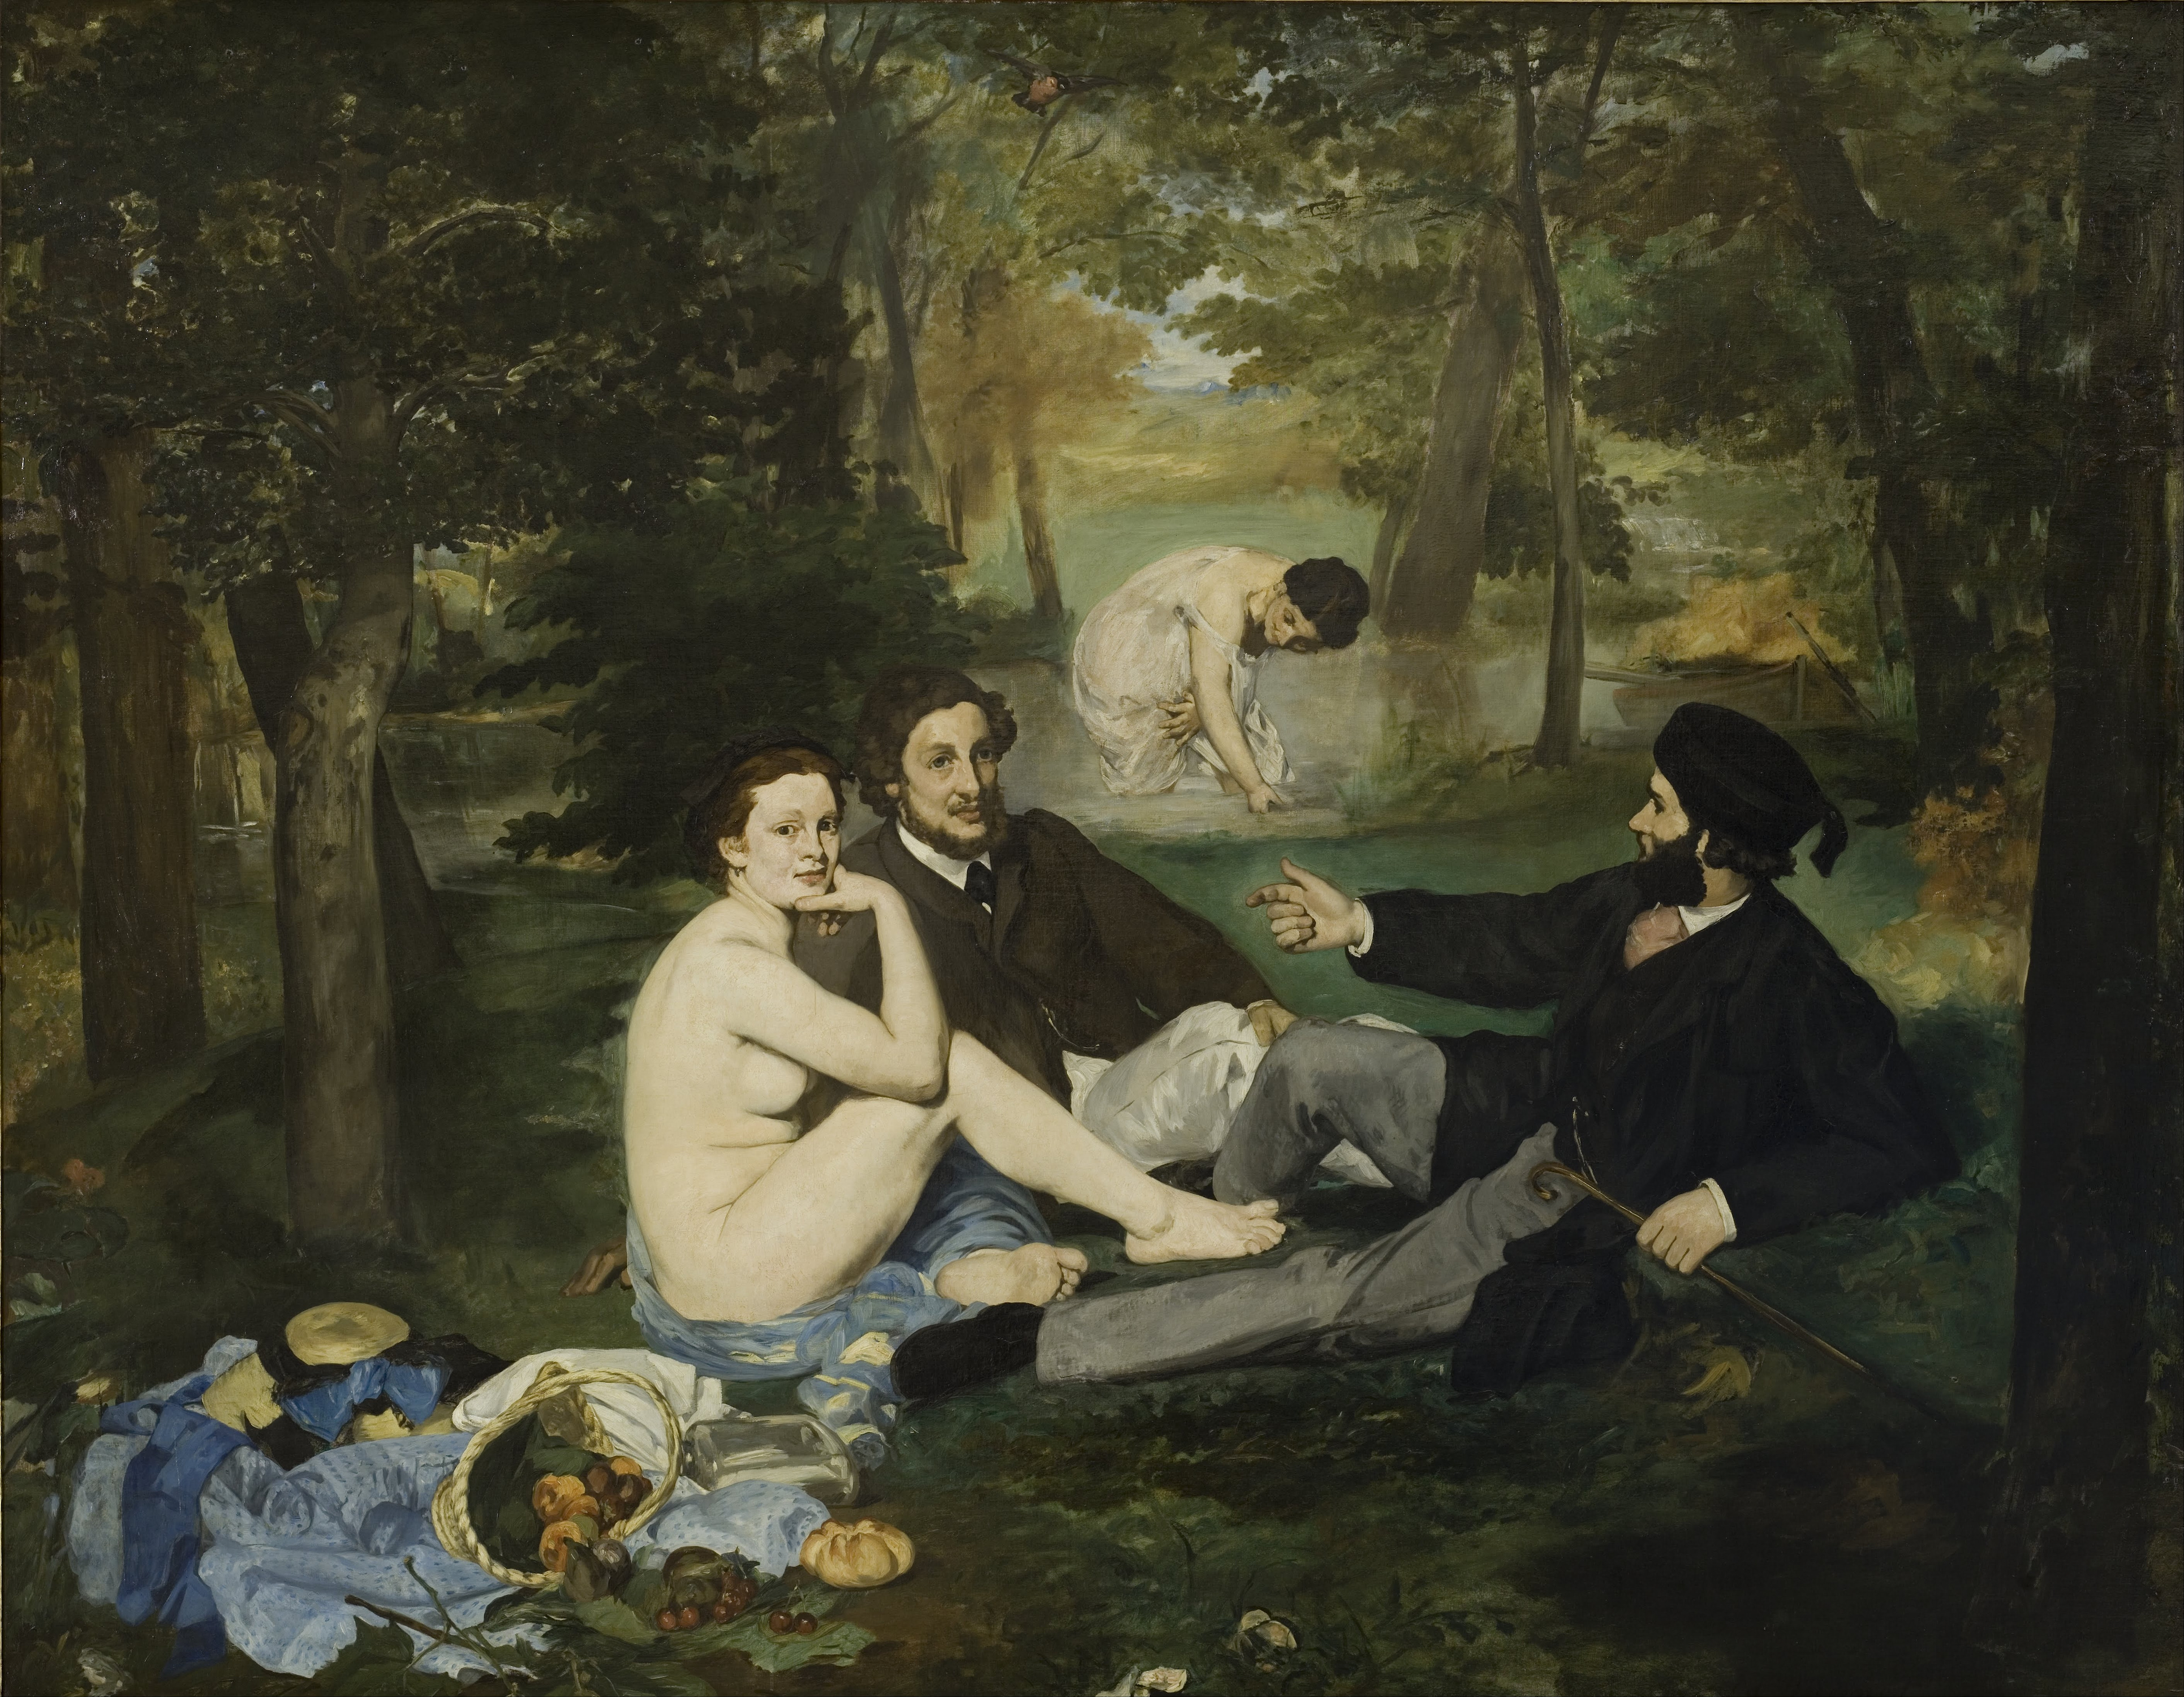 The Luncheon on the Grass by Édouard Manet - 1862-1863 - 208 × 265 cm Musée d'Orsay